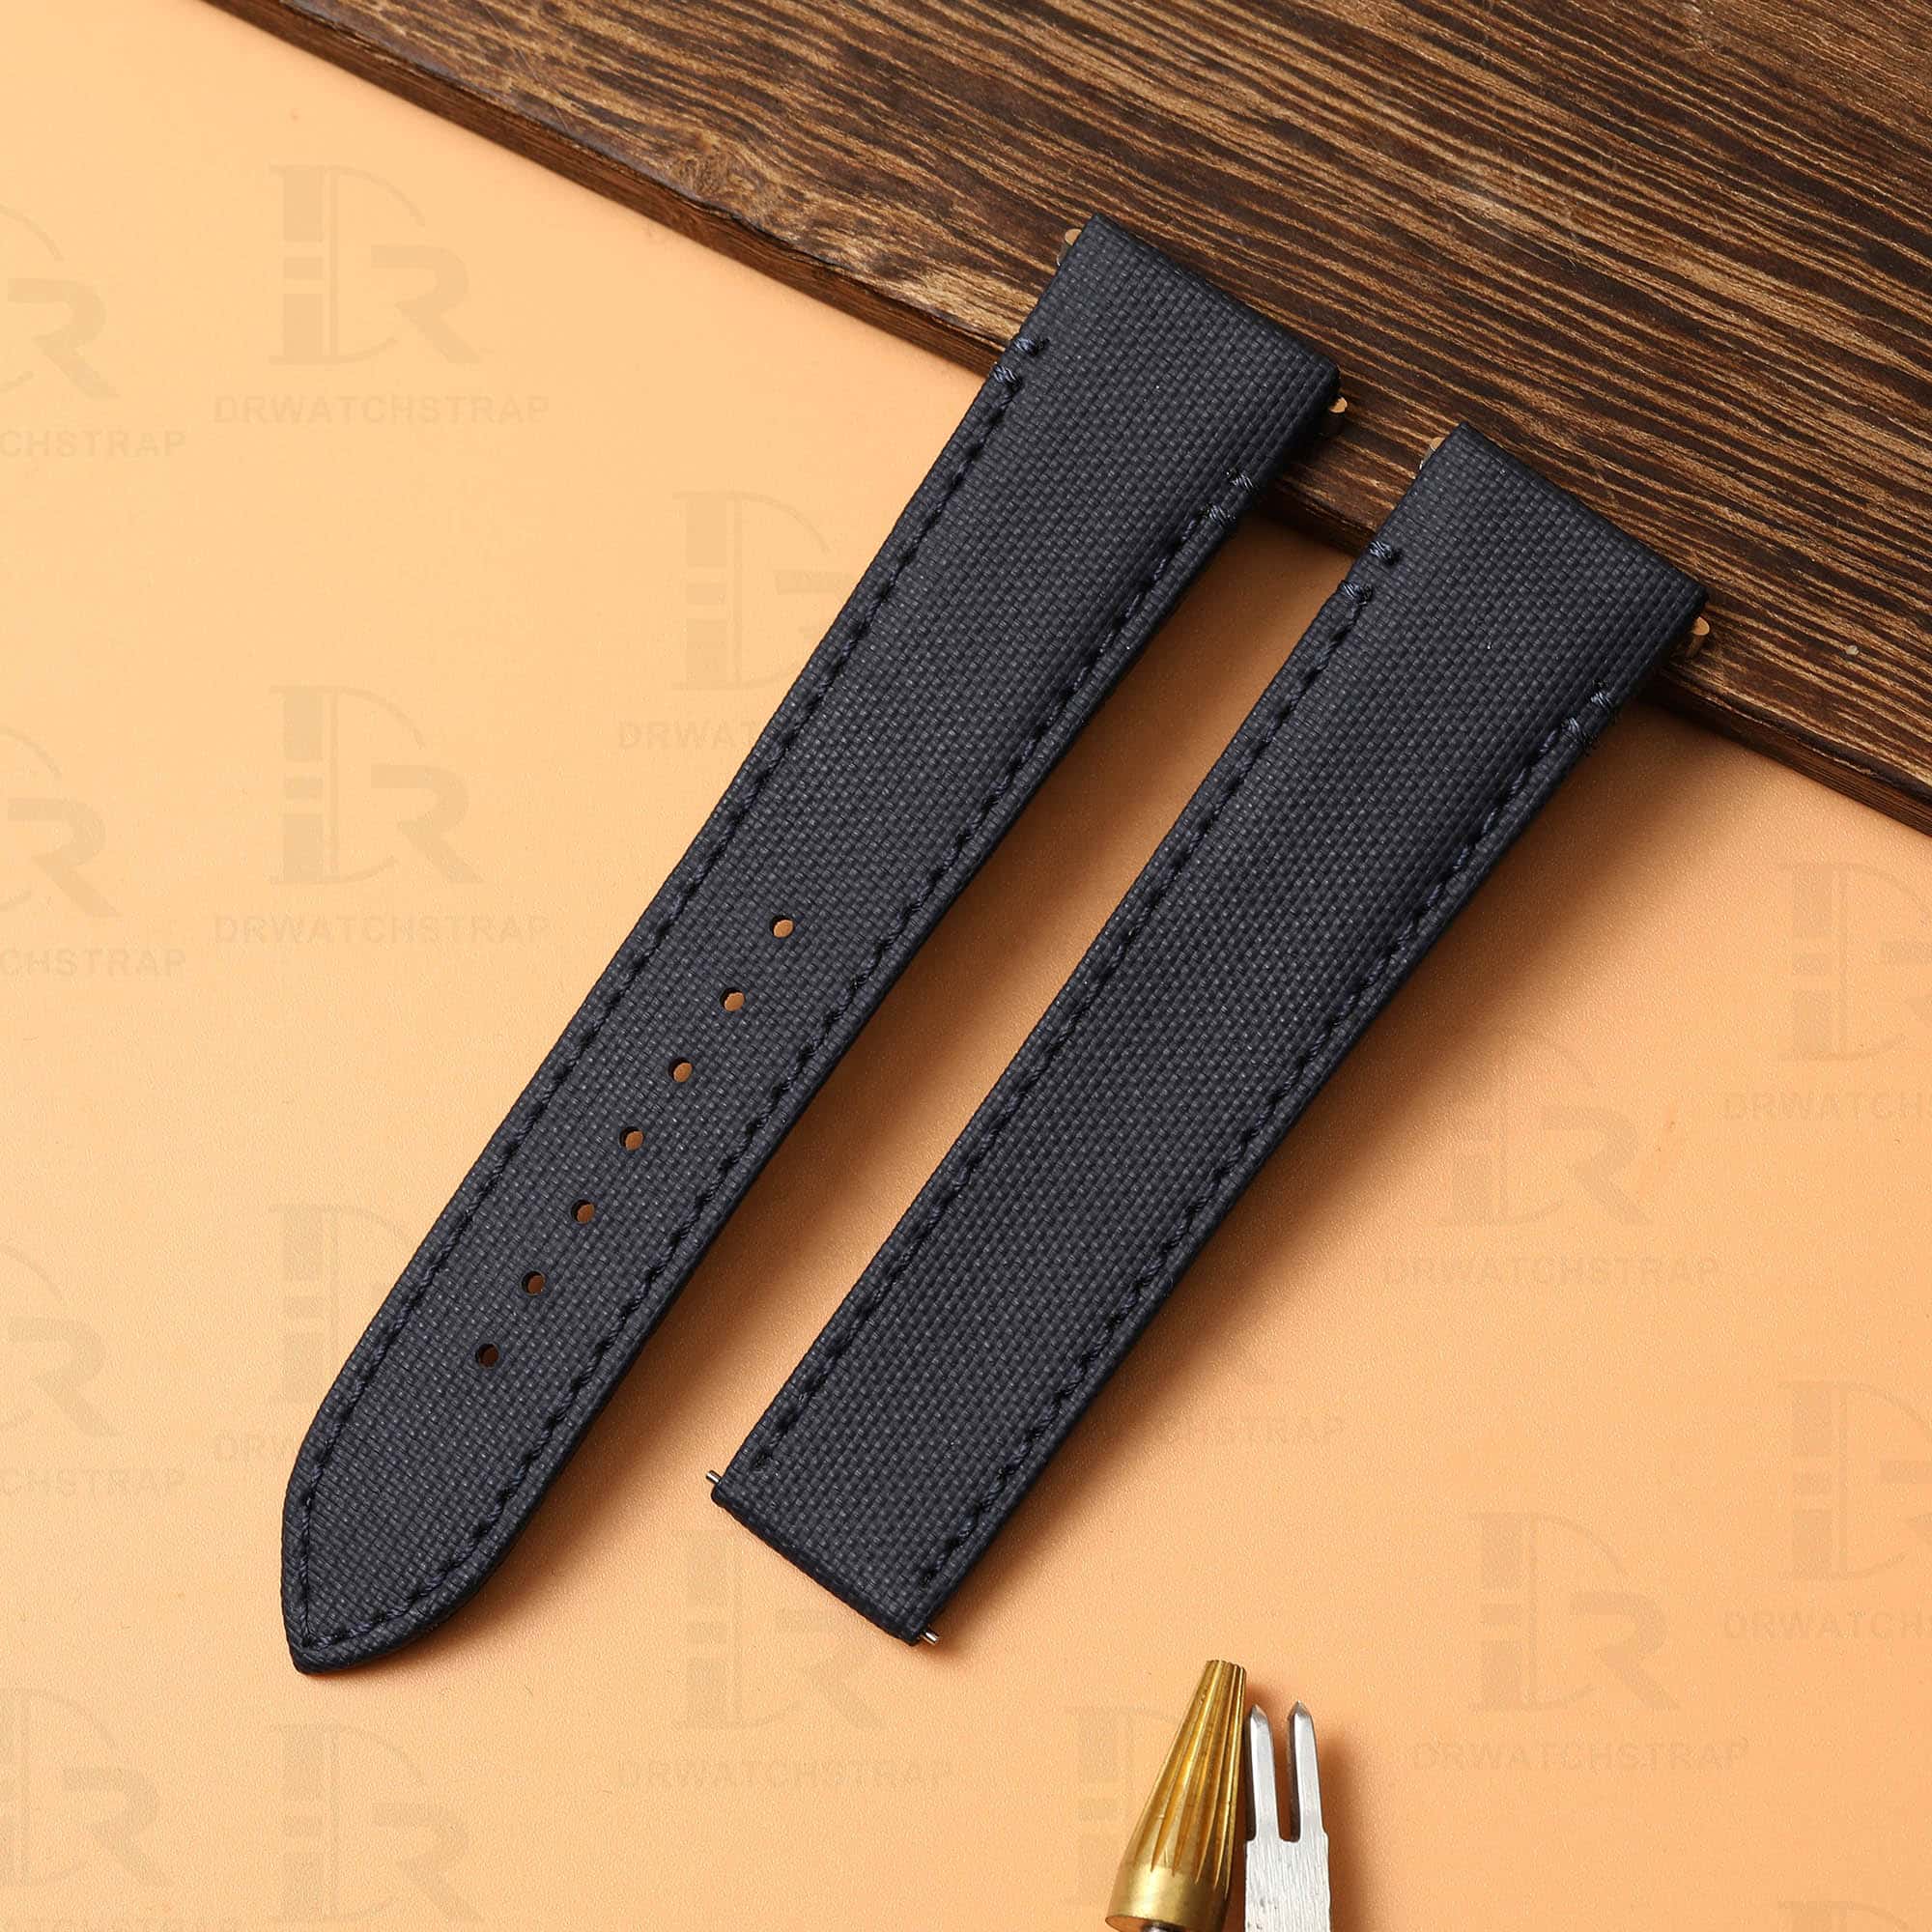 Custom Quickswitch replacement Black Nylon leather watch straps & watch bands for Cartier Santos Medium 35mm Large 40mm watch